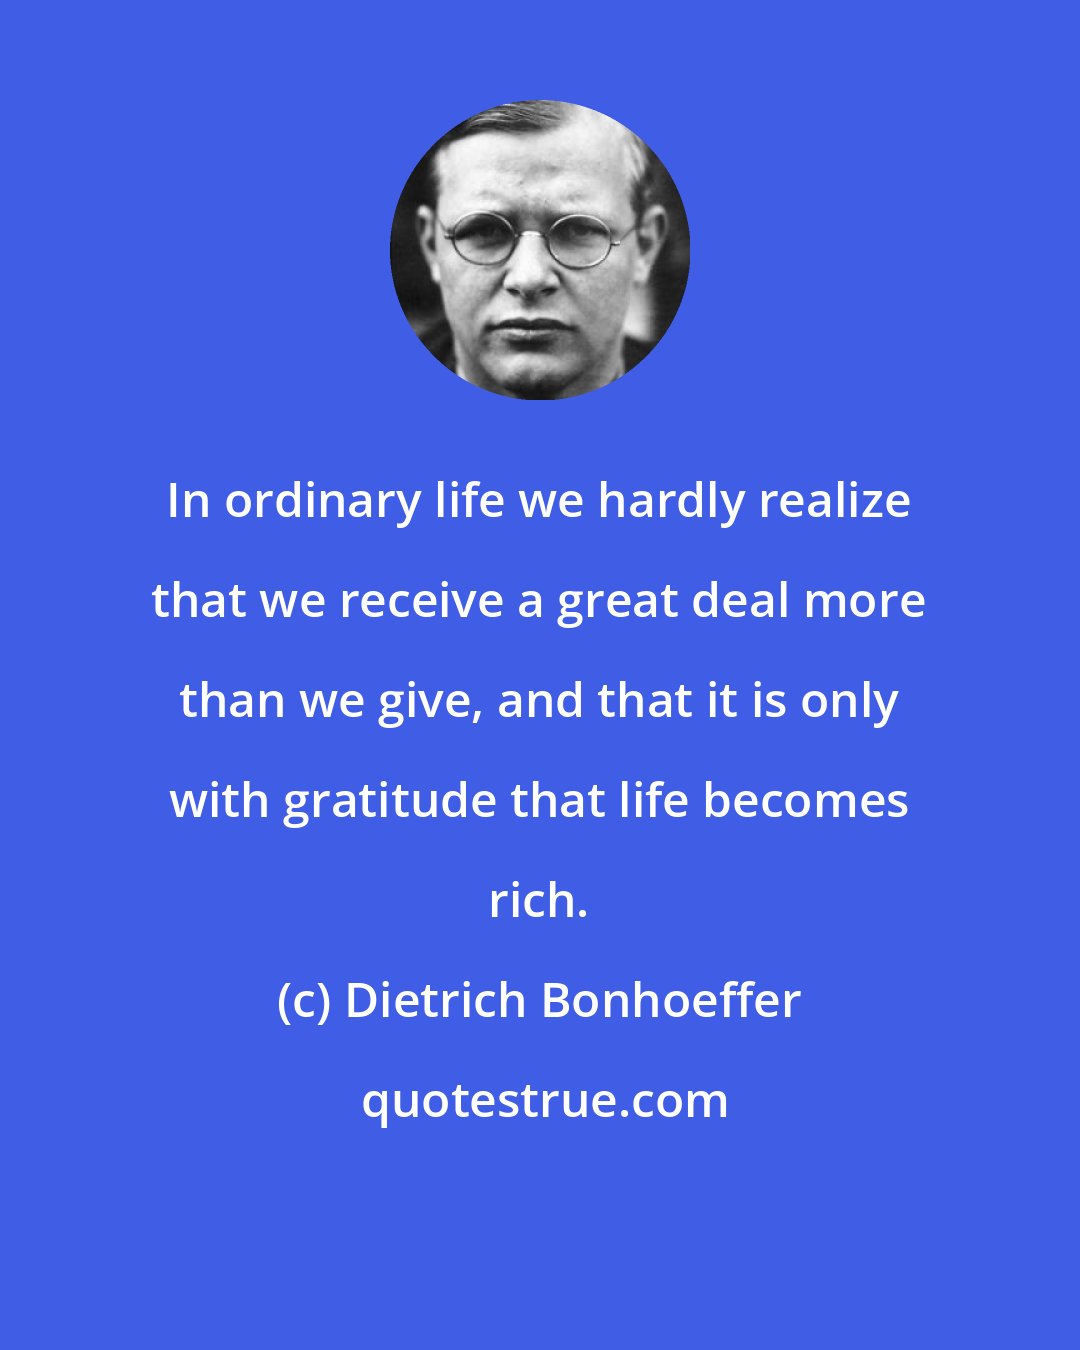 Dietrich Bonhoeffer: In ordinary life we hardly realize that we receive a great deal more than we give, and that it is only with gratitude that life becomes rich.